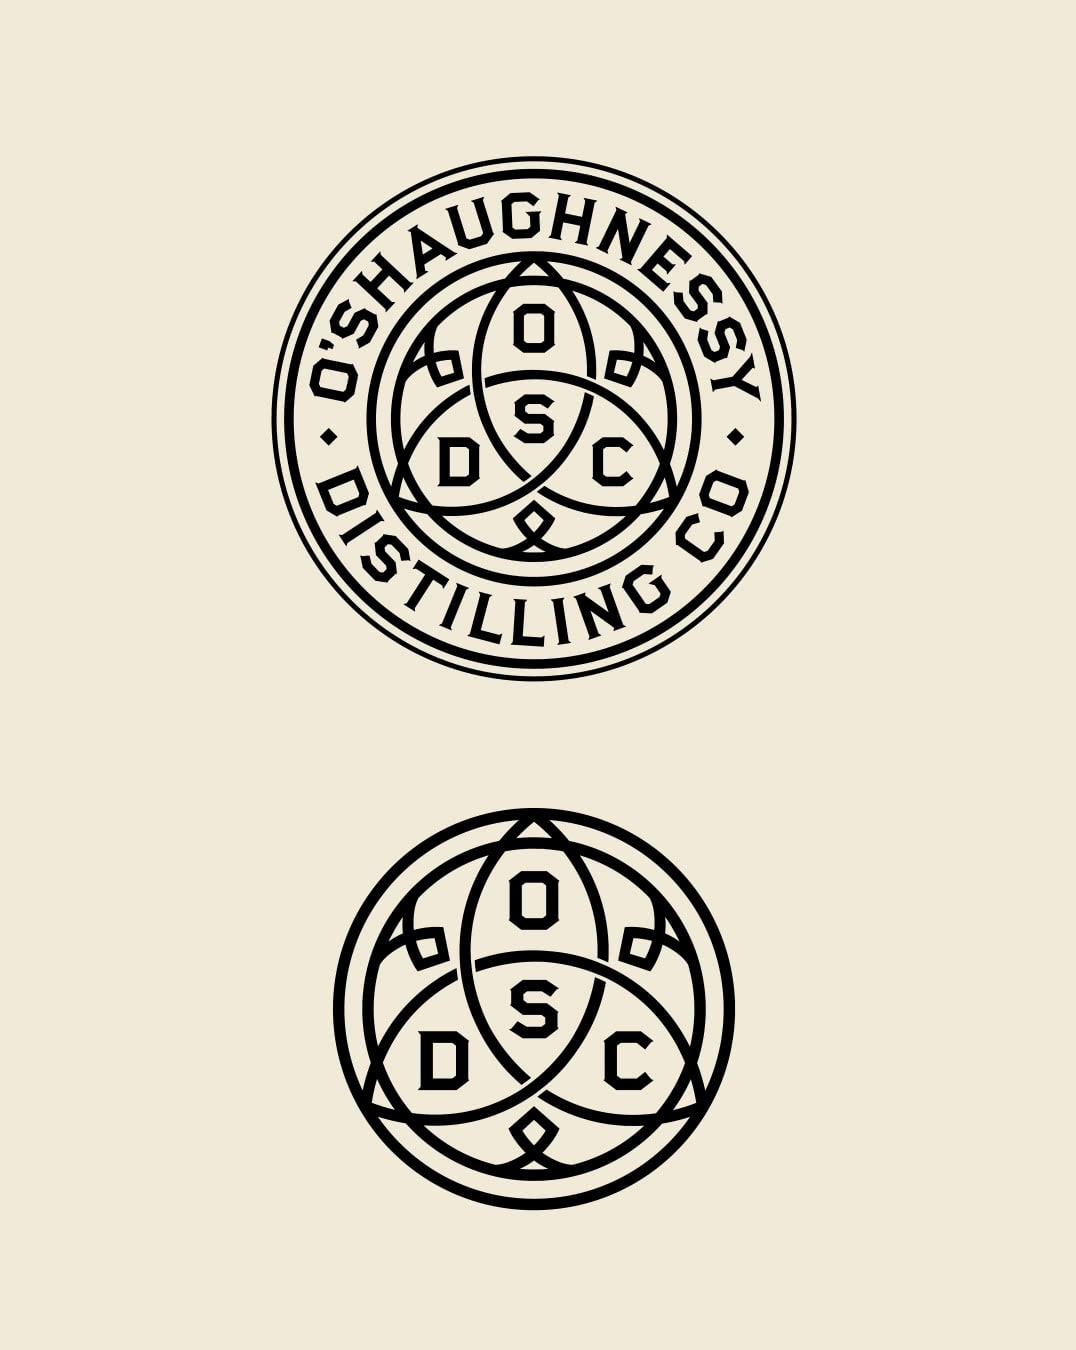 O’Shaughnessy Distilling Co. one color logos